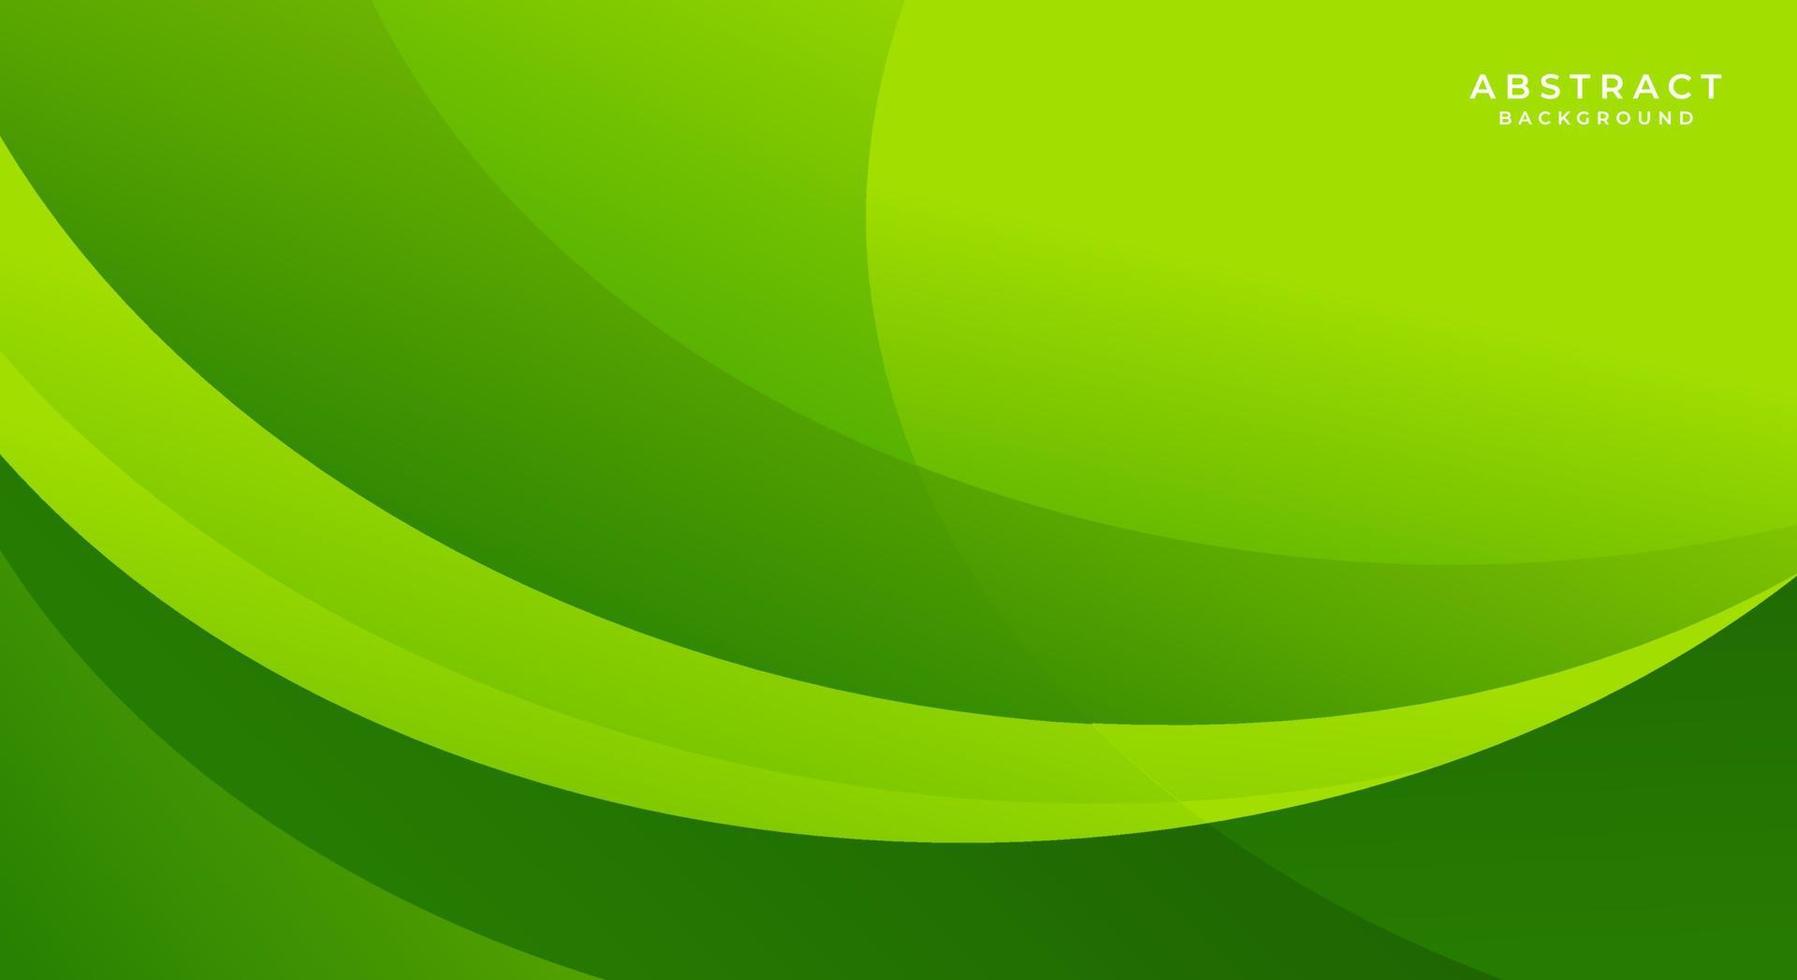 Abstract curve green background vector